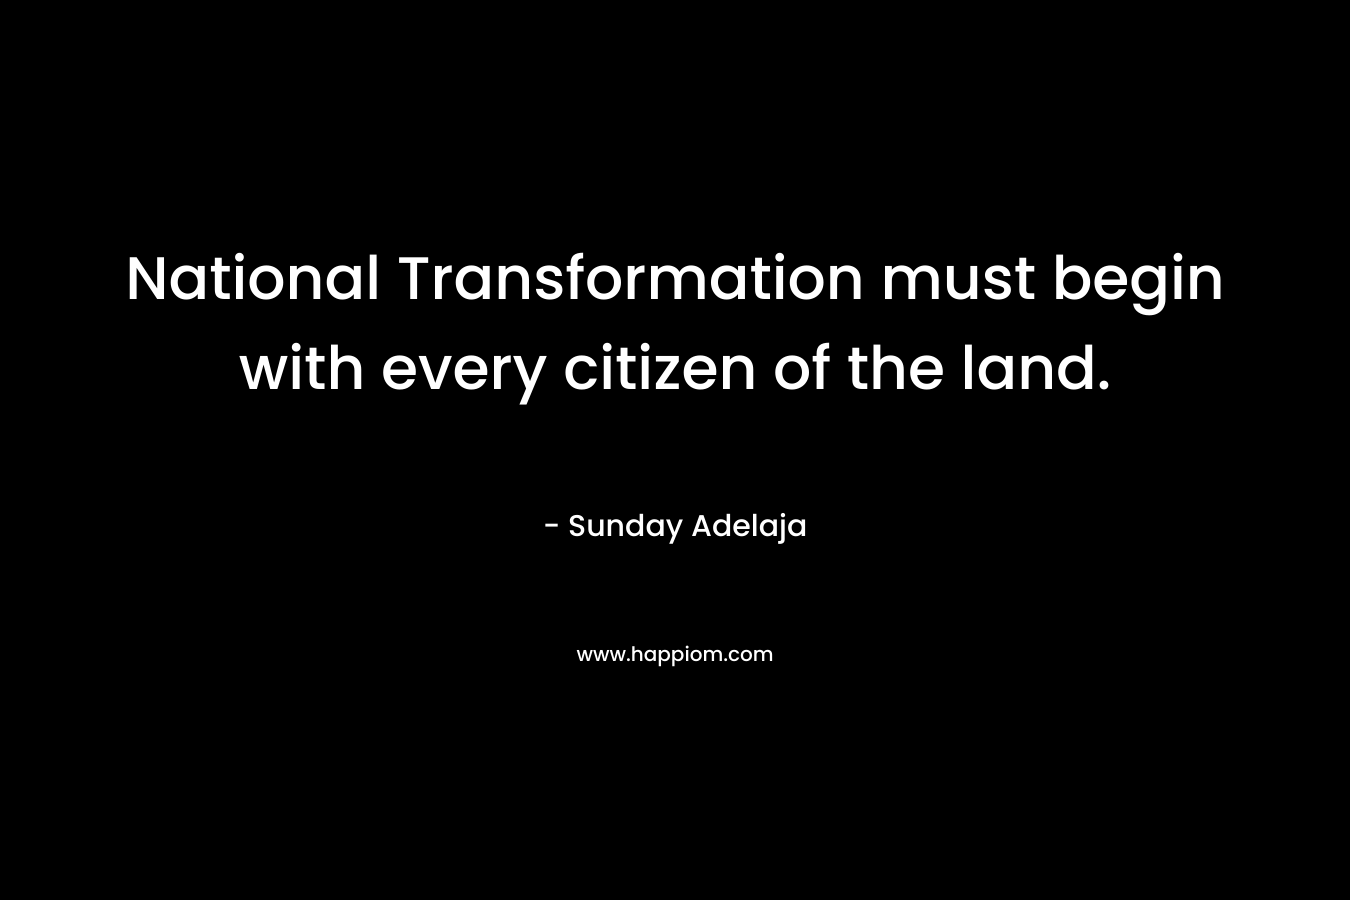 National Transformation must begin with every citizen of the land.